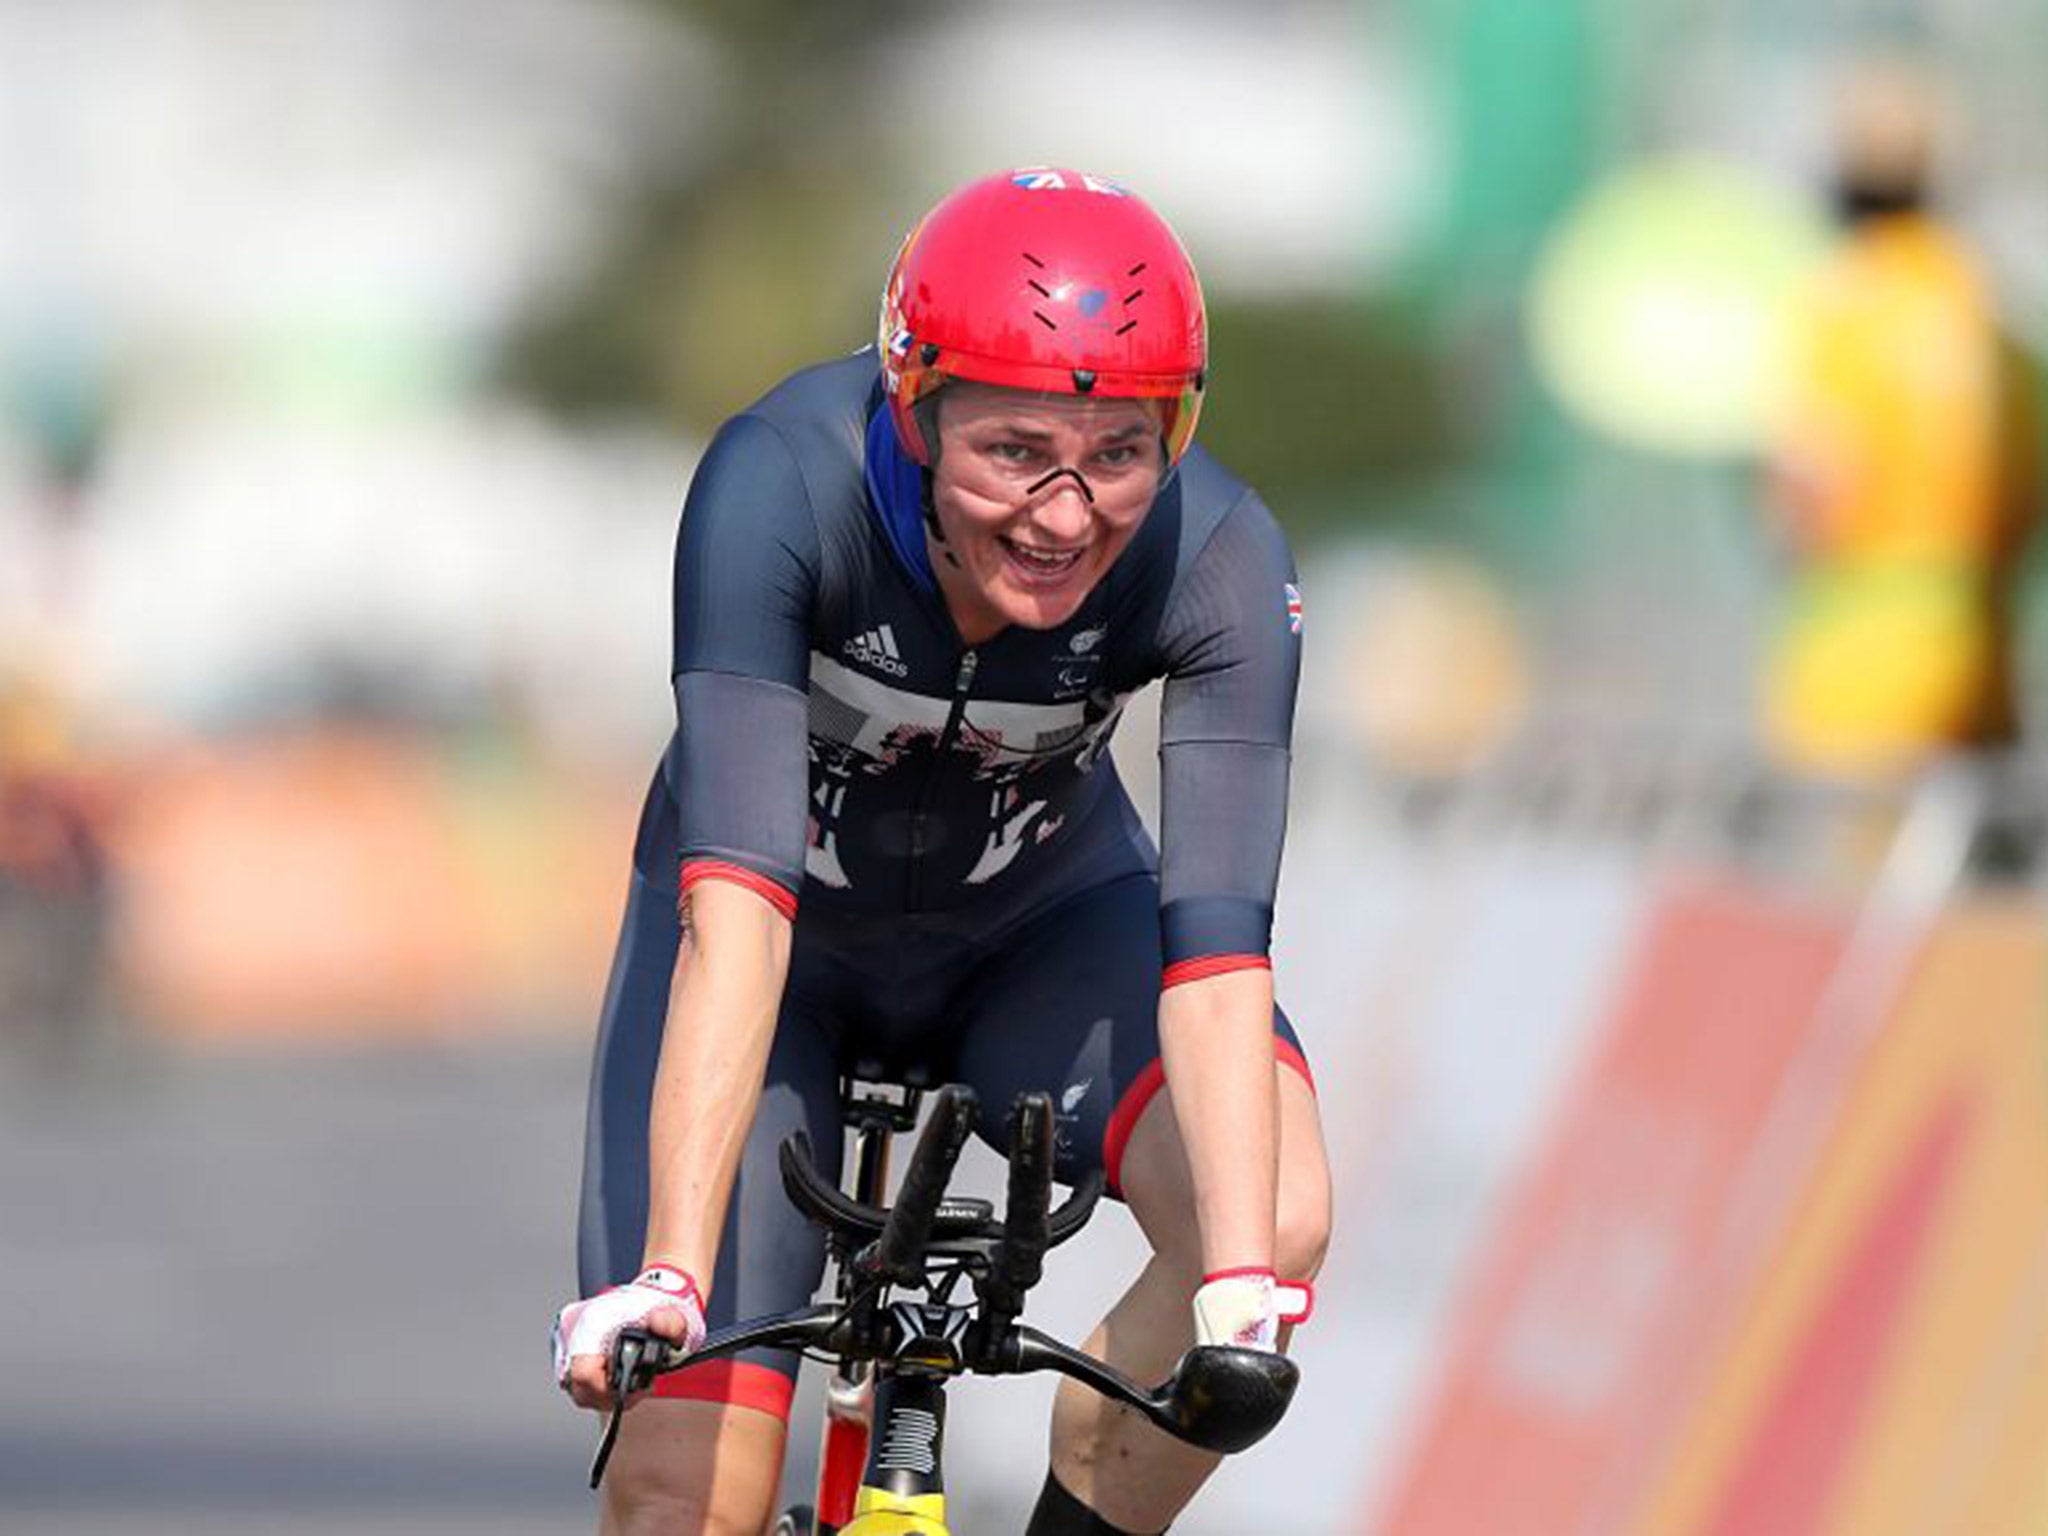 Dame Sarah Storey won her 13th Paralympic gold medal in the women's time trial